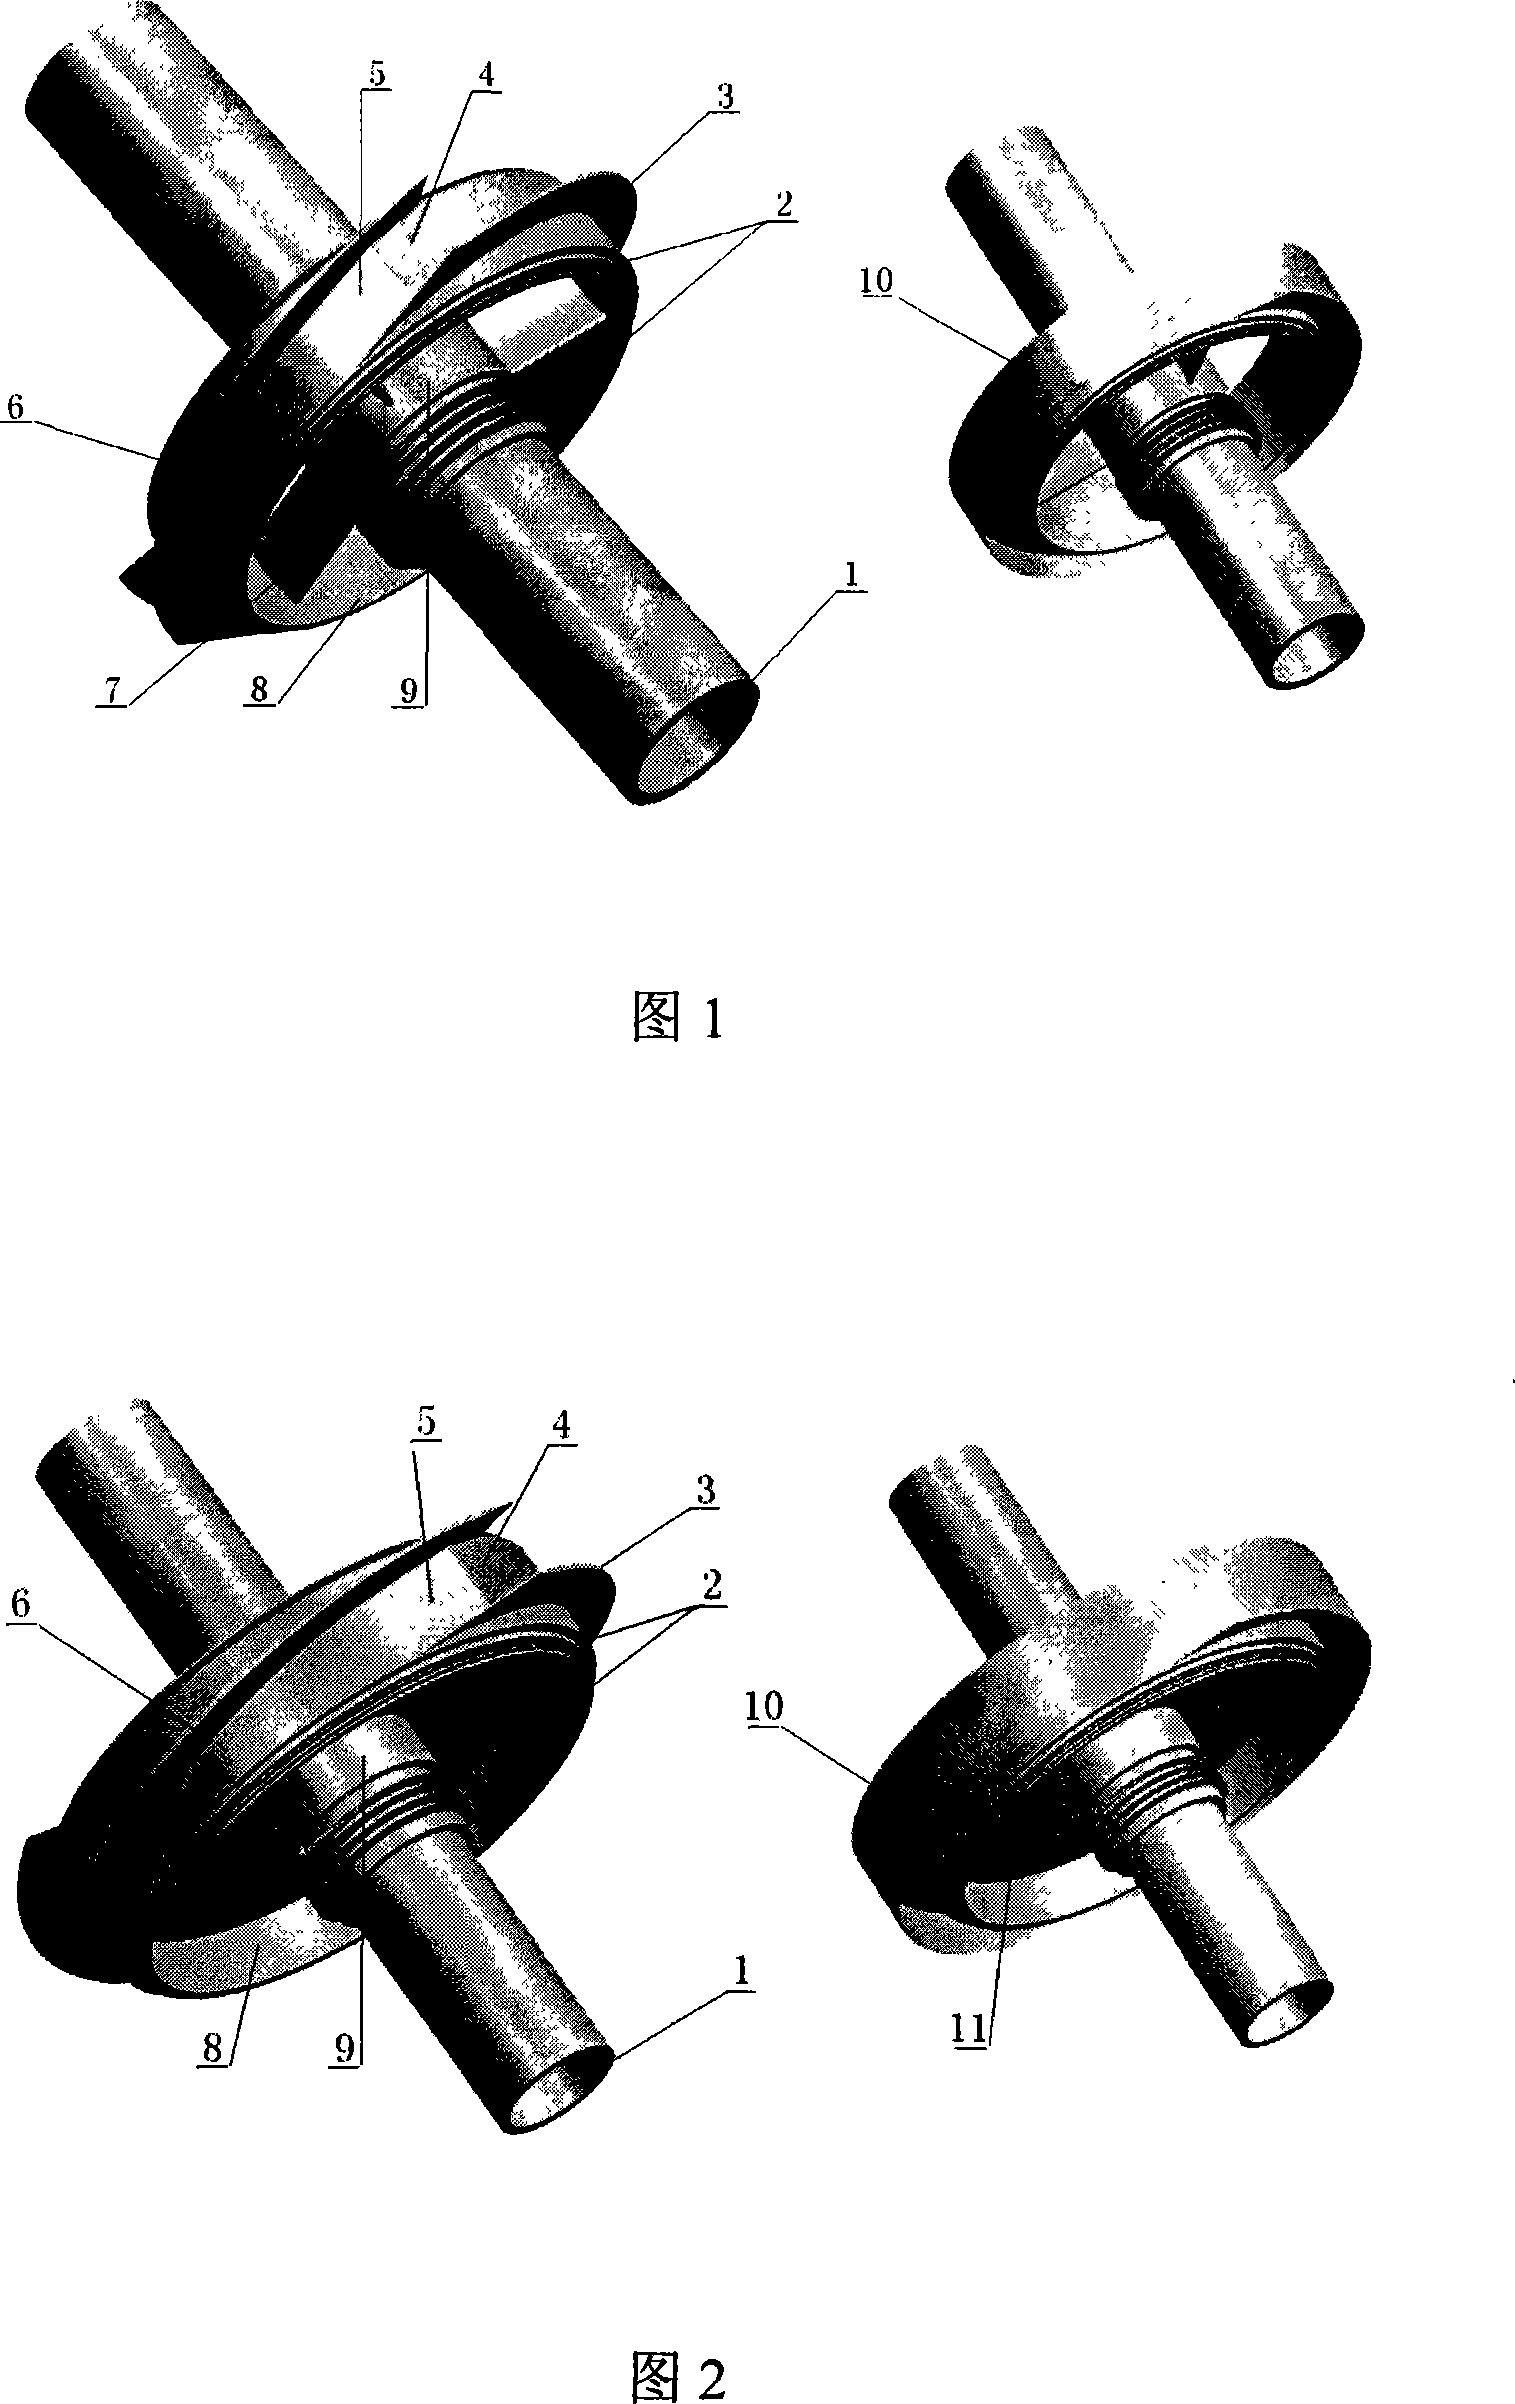 Hollow shaft rotating stamping compression rotor based on shock compress technique